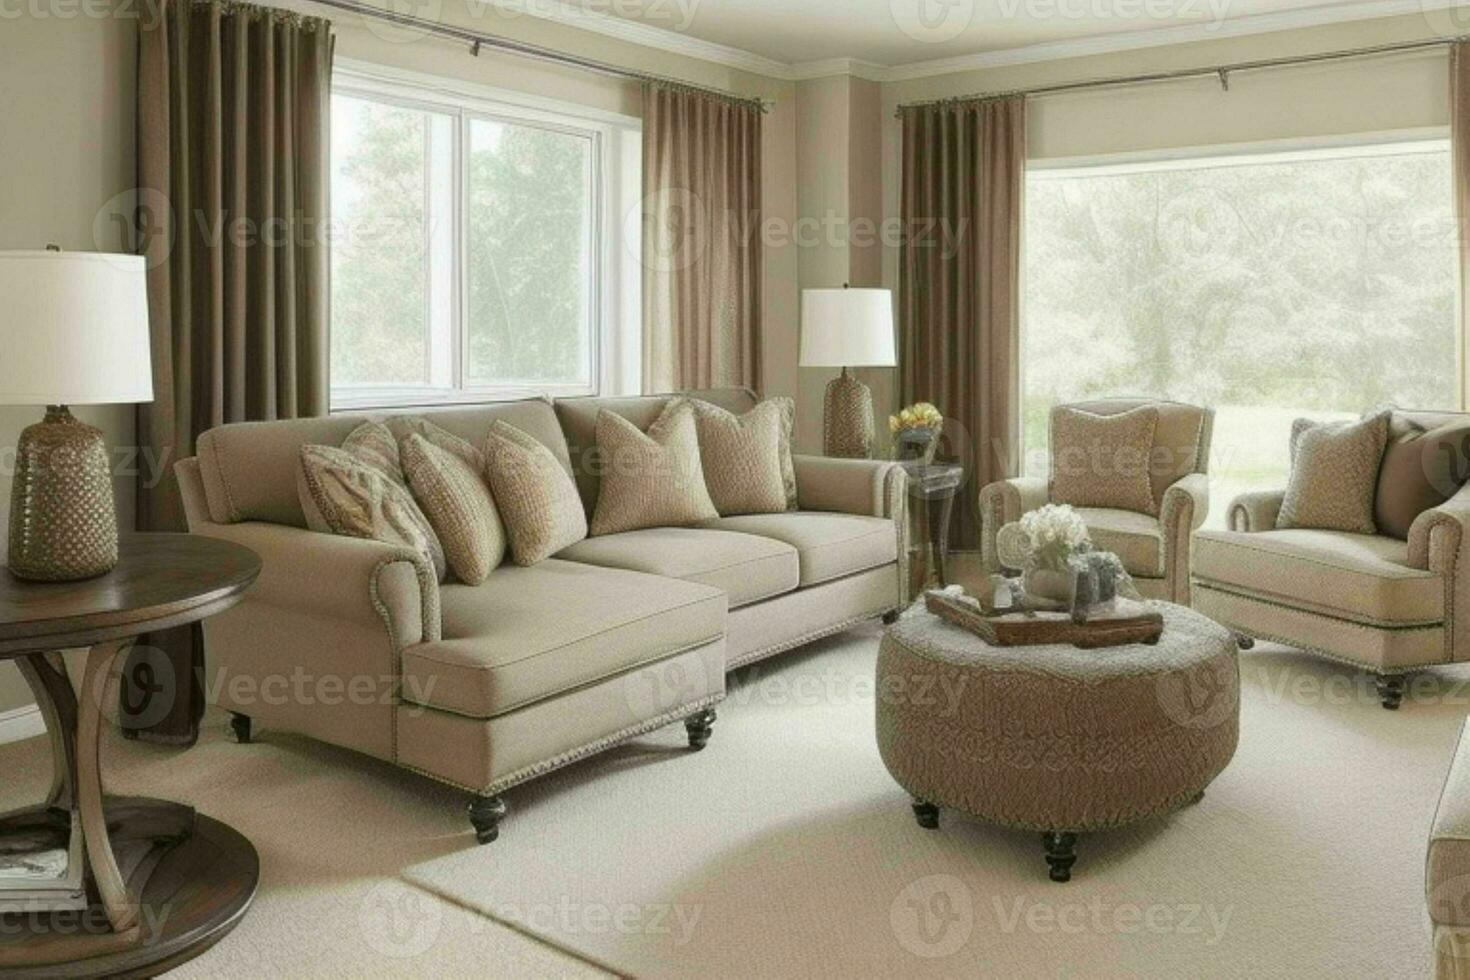 Transitional style living room design. Pro Photo